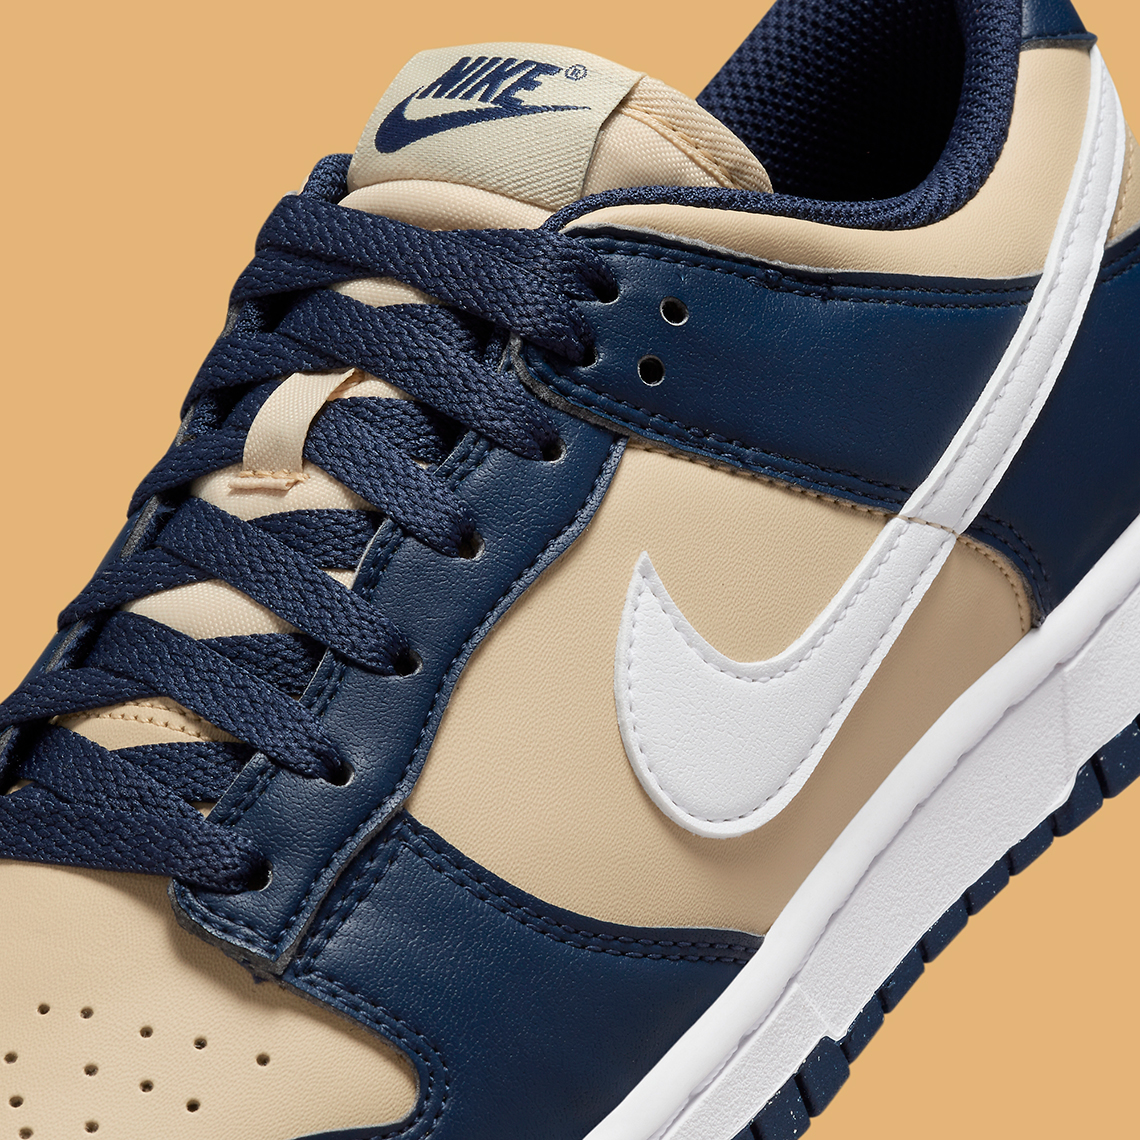 nike Dunk clothes low next nature midnight navy team gold dd1873 401 2